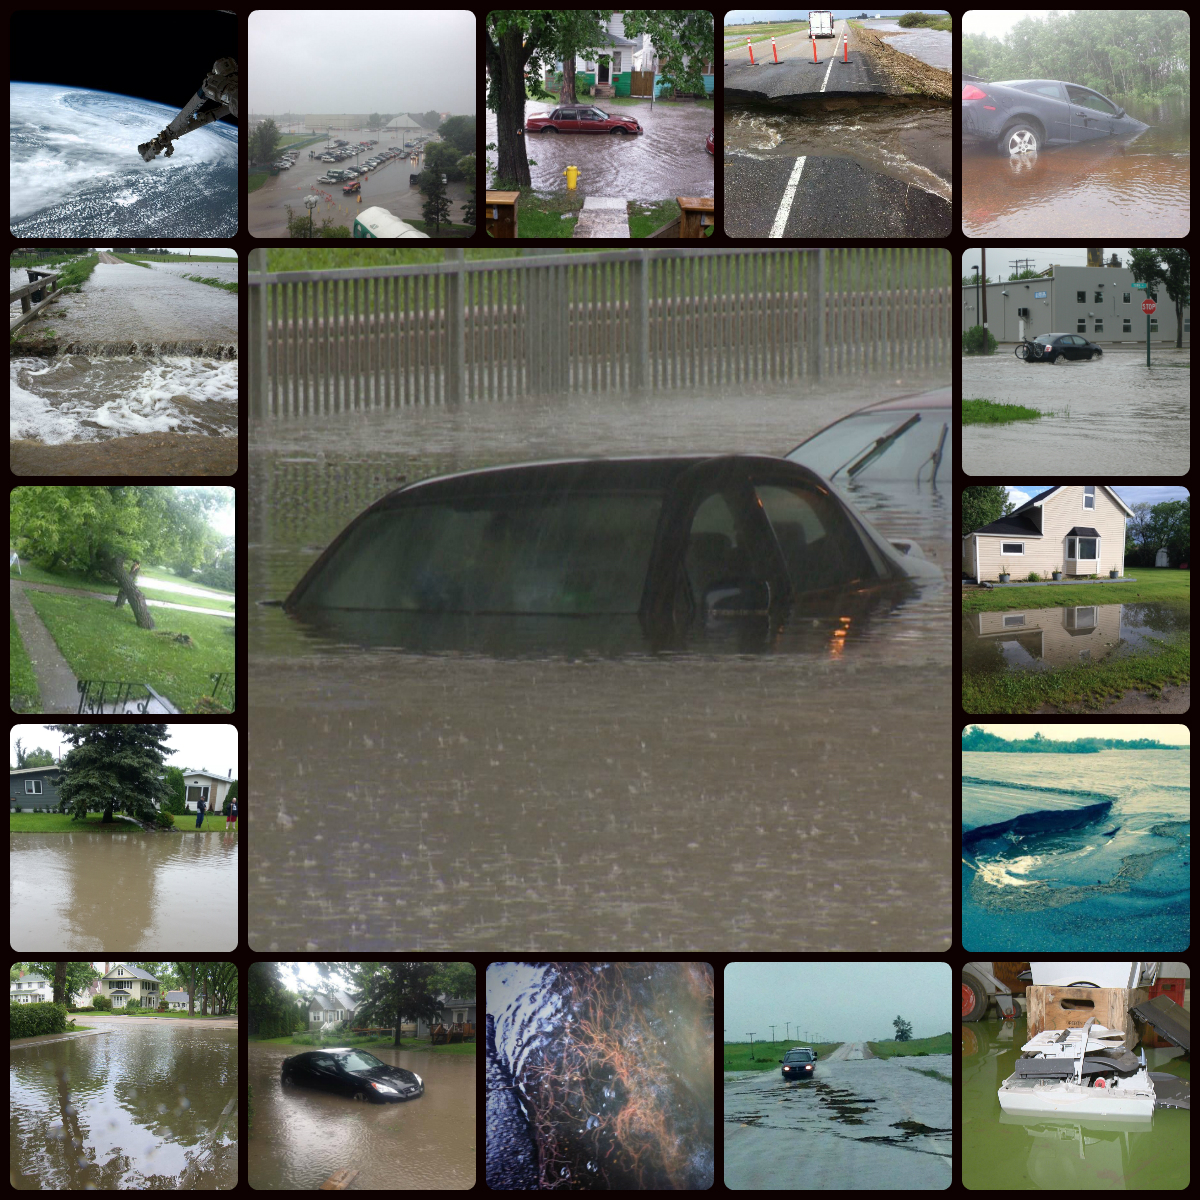 A collection of photos documenting the late June/early July flooding in southeast Saskatchewan.